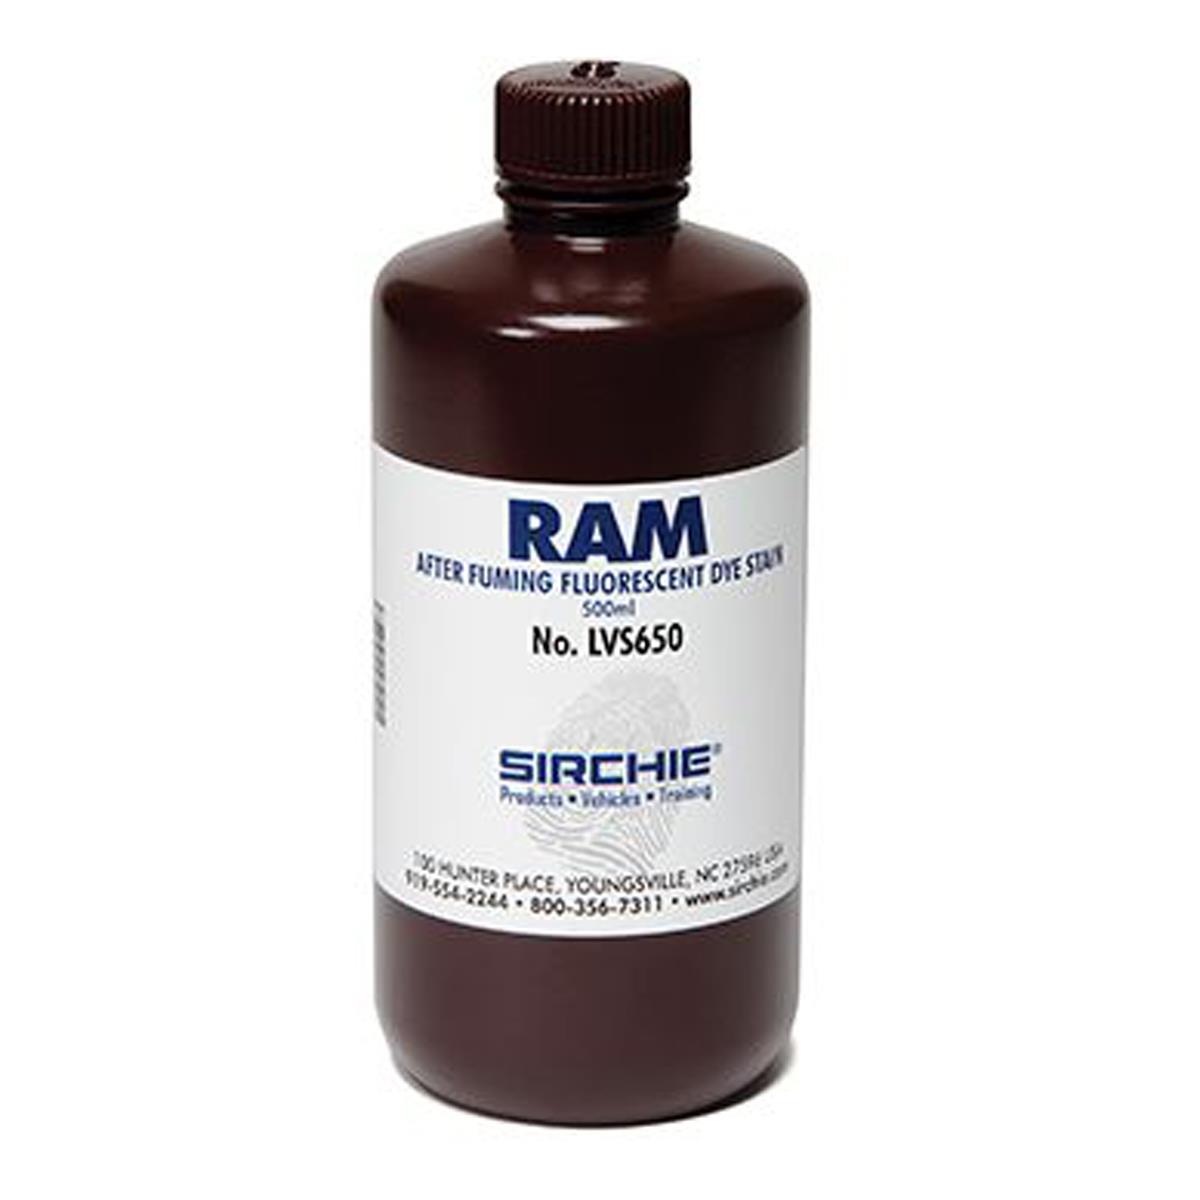 Image of Sirchie RAM After Fuming Fluorescent Dye Stain